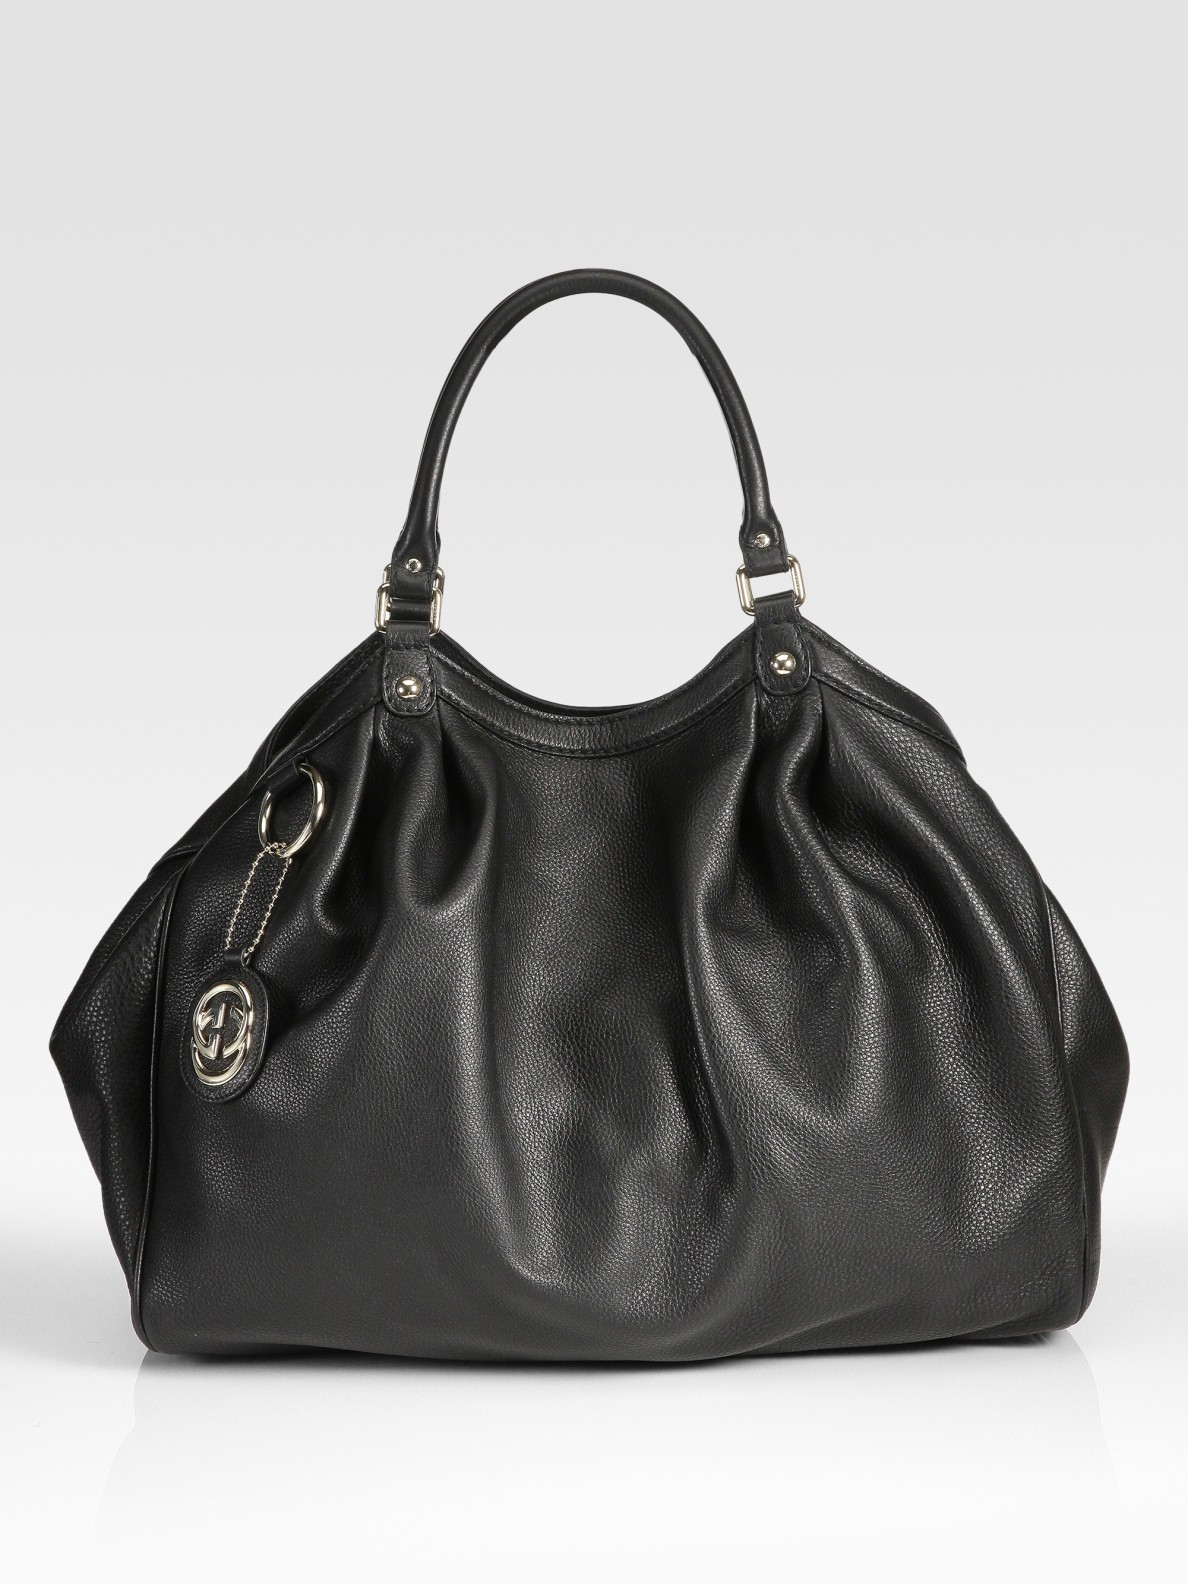 Lyst - Gucci Sukey Large Tote Bag in Black